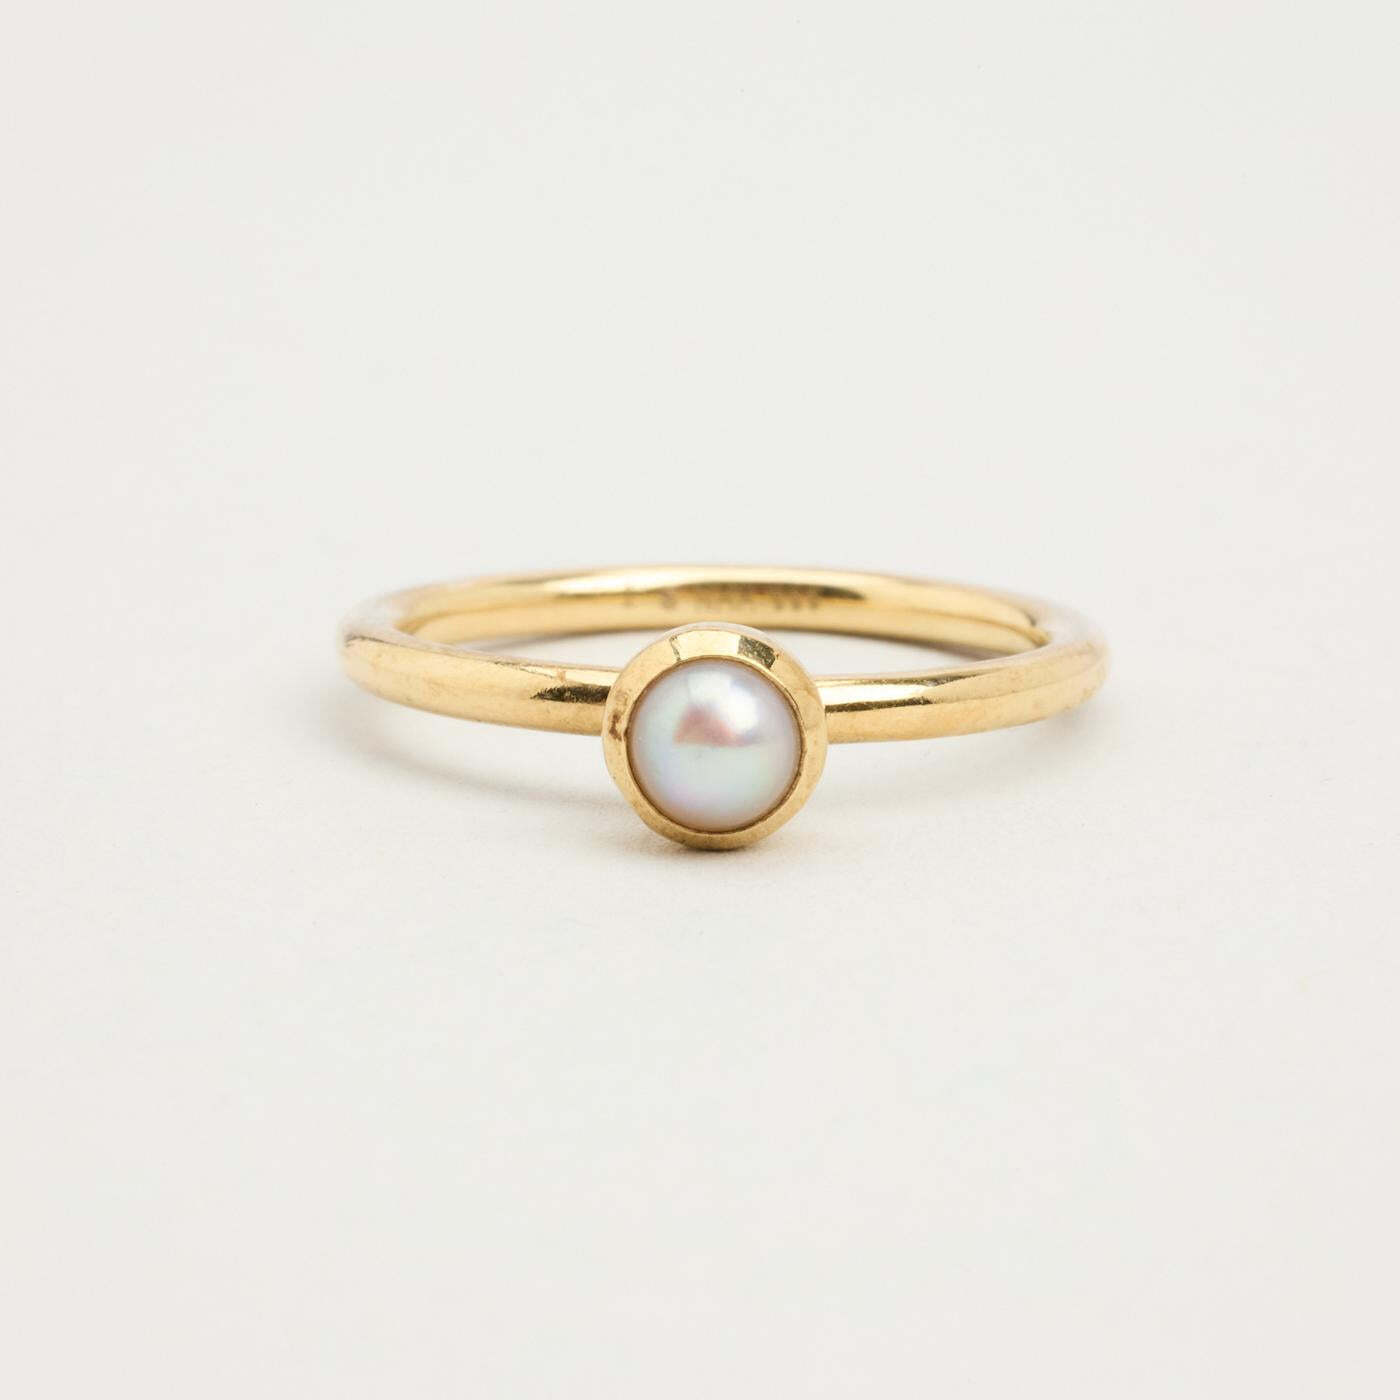 Ring with and pearl in 8K Gold size 6 | Real Genuine Gold | Fine